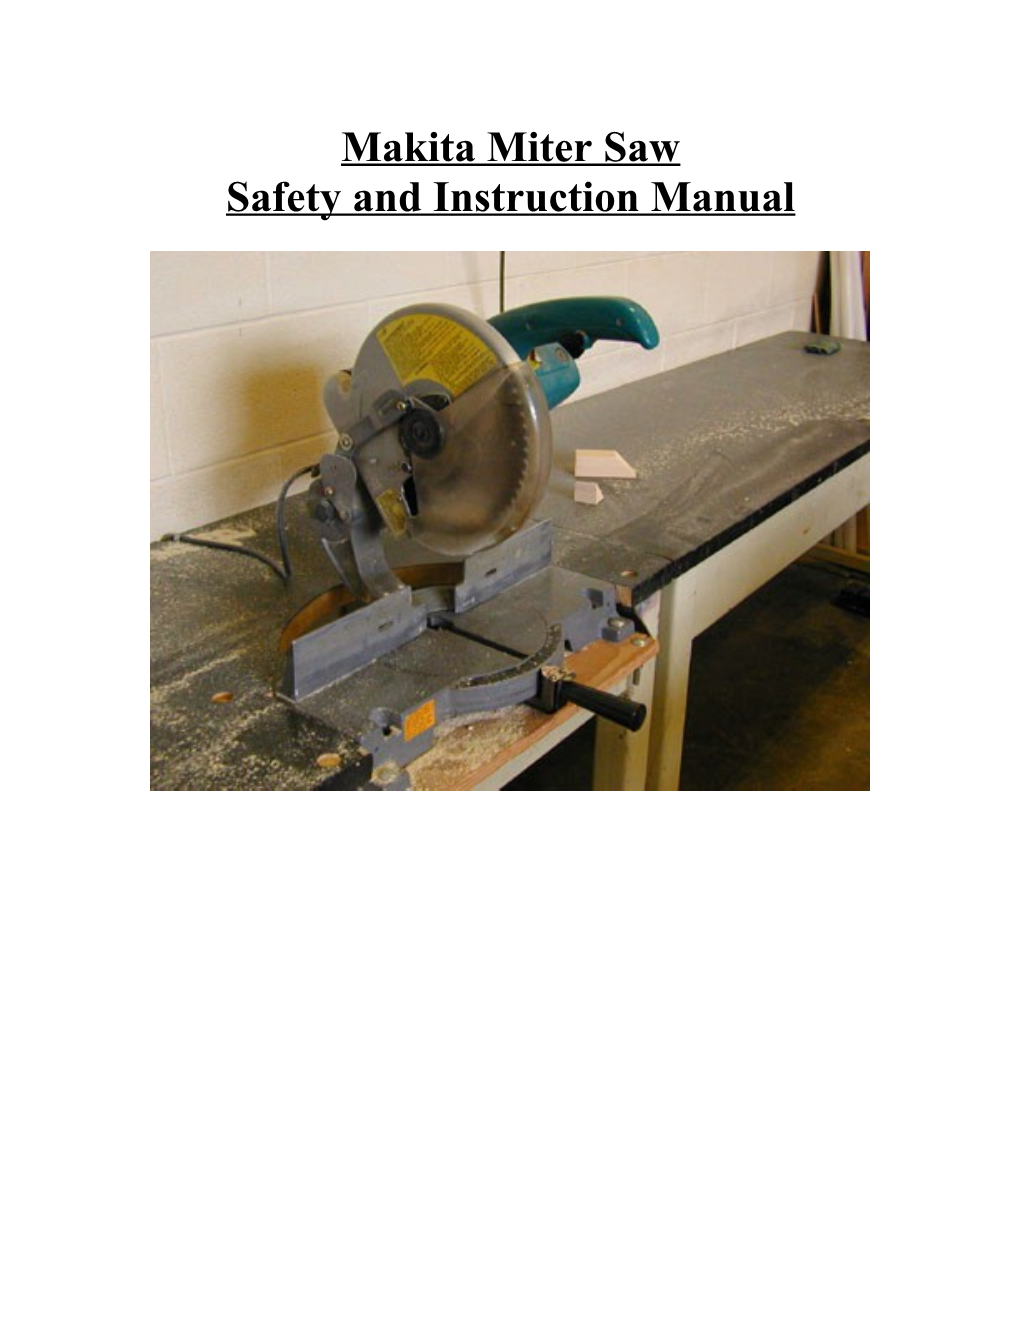 Safety and Instruction Manual